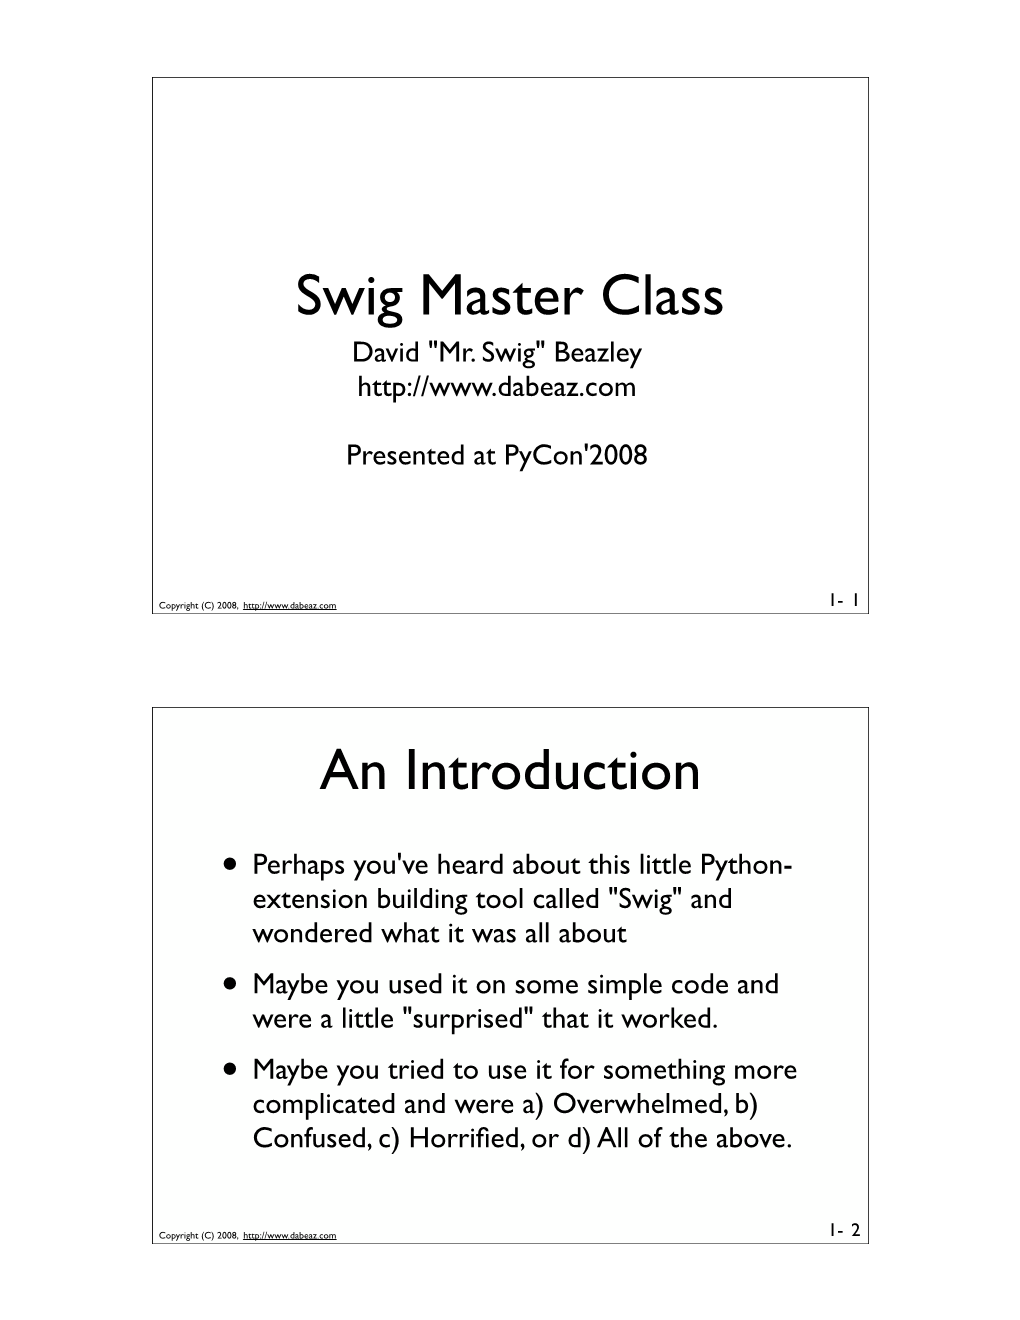 Swig Master Class an Introduction